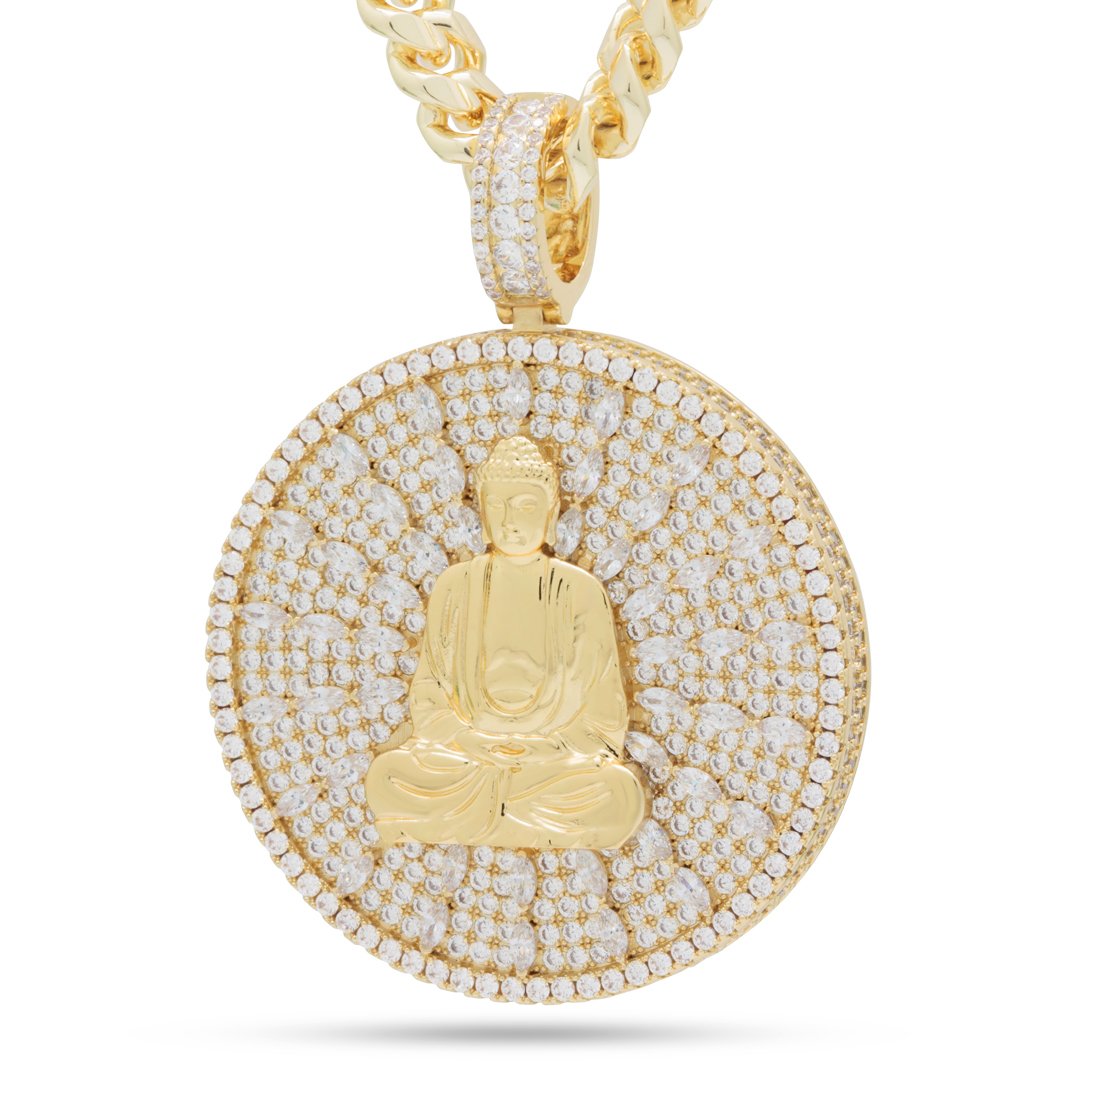 Rakesh Traders Golden Glass Beads With Metal Buddha Pendant Necklace  Handcrafted, Packet, Size: Adjustable at Rs 249/piece in New Delhi